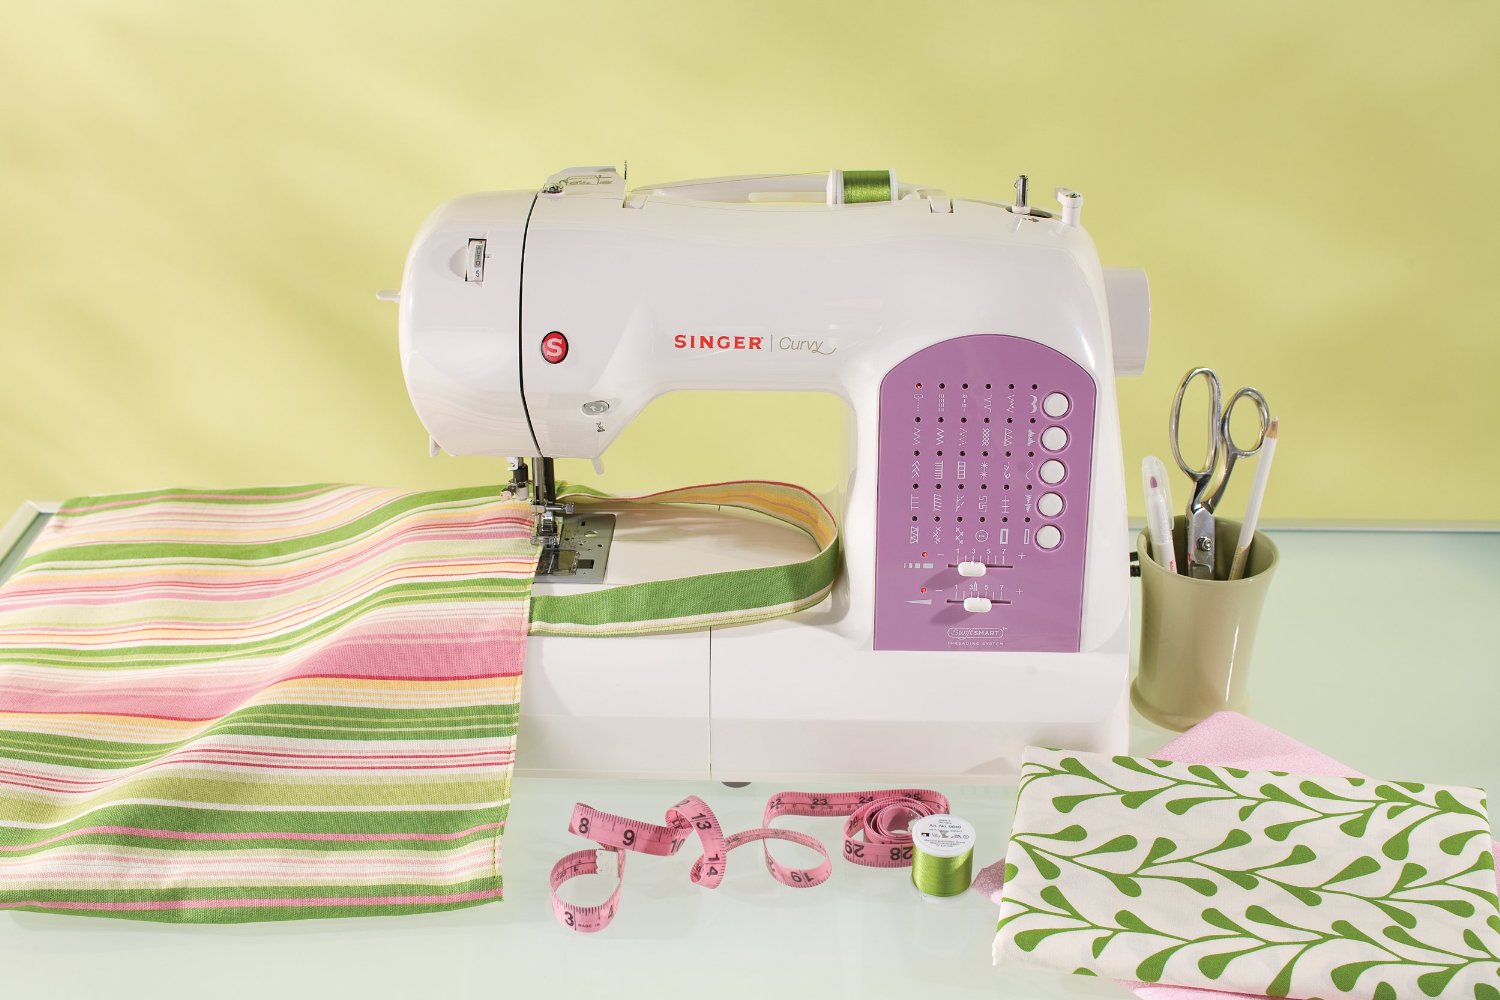 Singer Curvy 8763  Sewing Machine Review